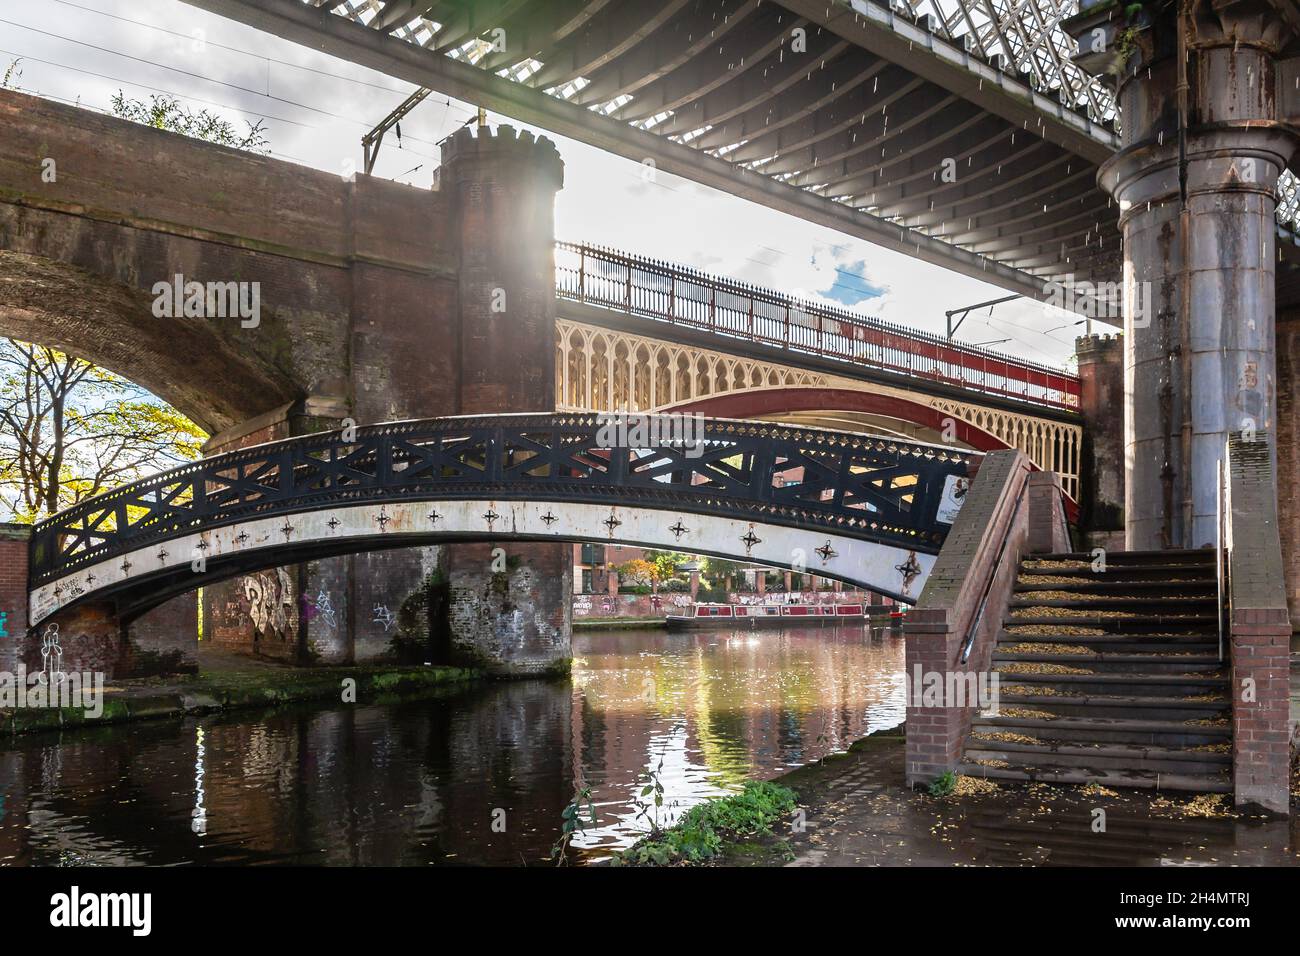 Castlefield Bridgewater canal with new and old railway viaducts and bridges using old (cast iron and brick) and modern steel architecture. Deansgate, Stock Photo